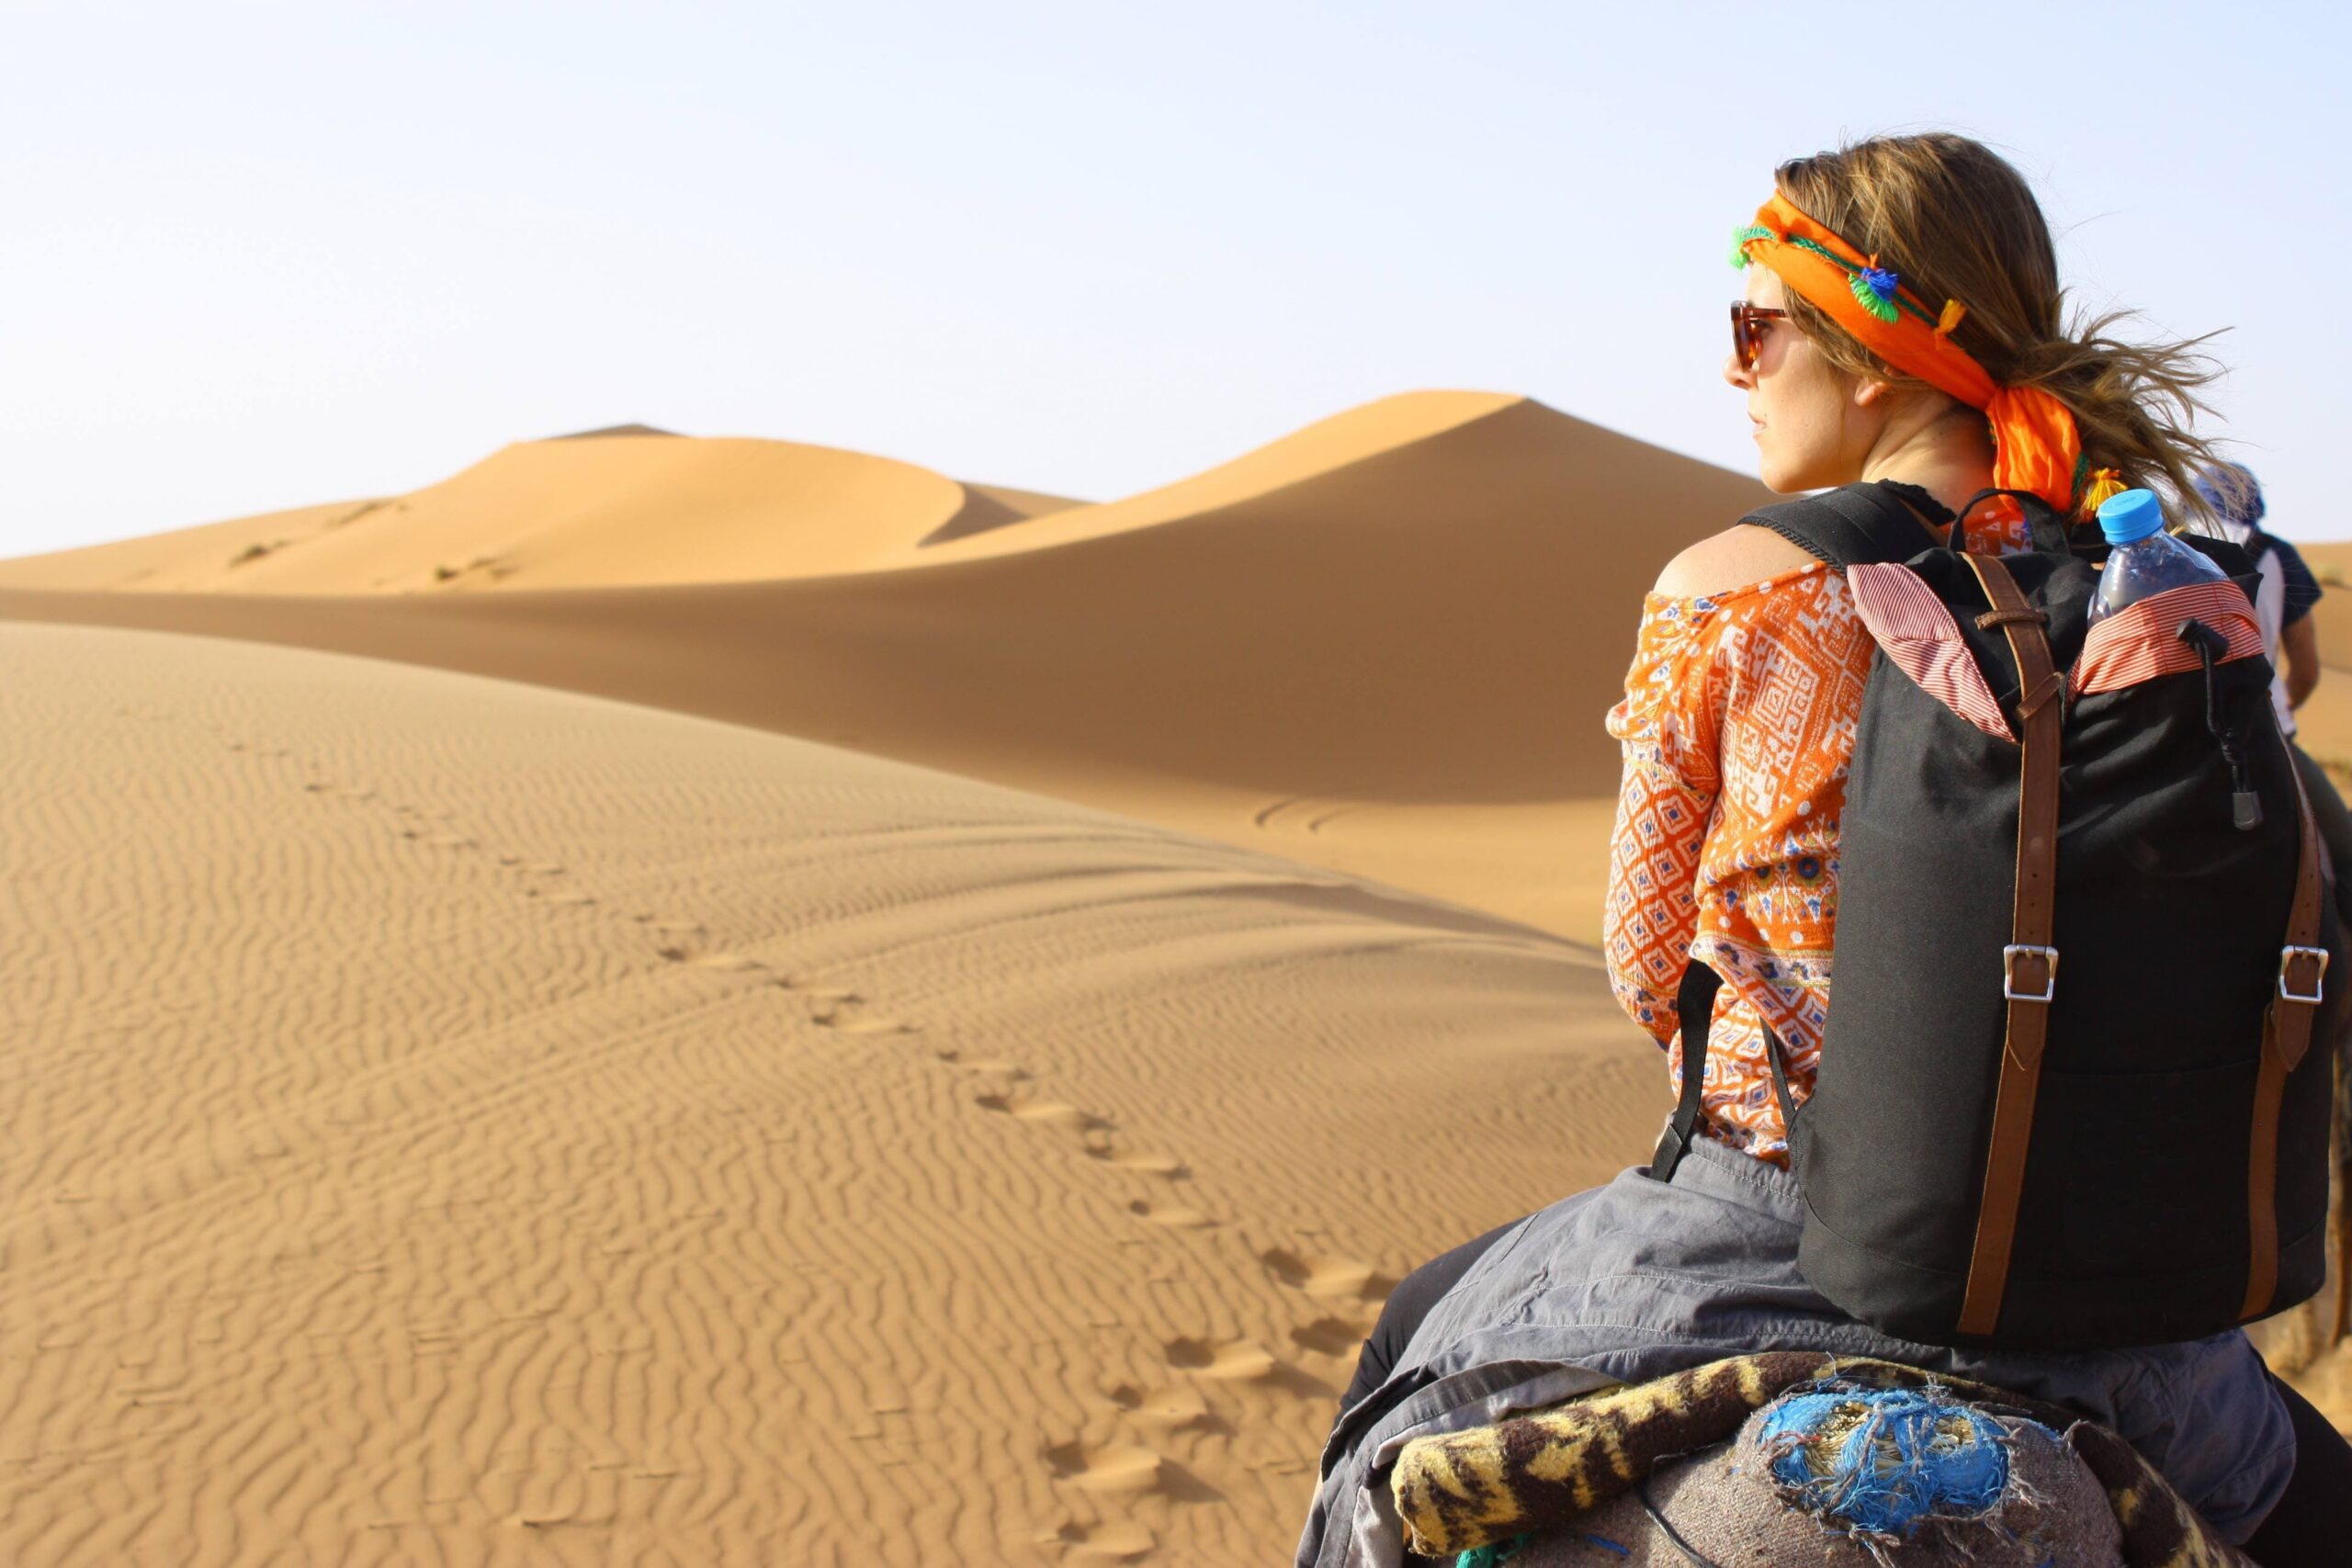 What Are The Rules For Female Tourists In Dubai?